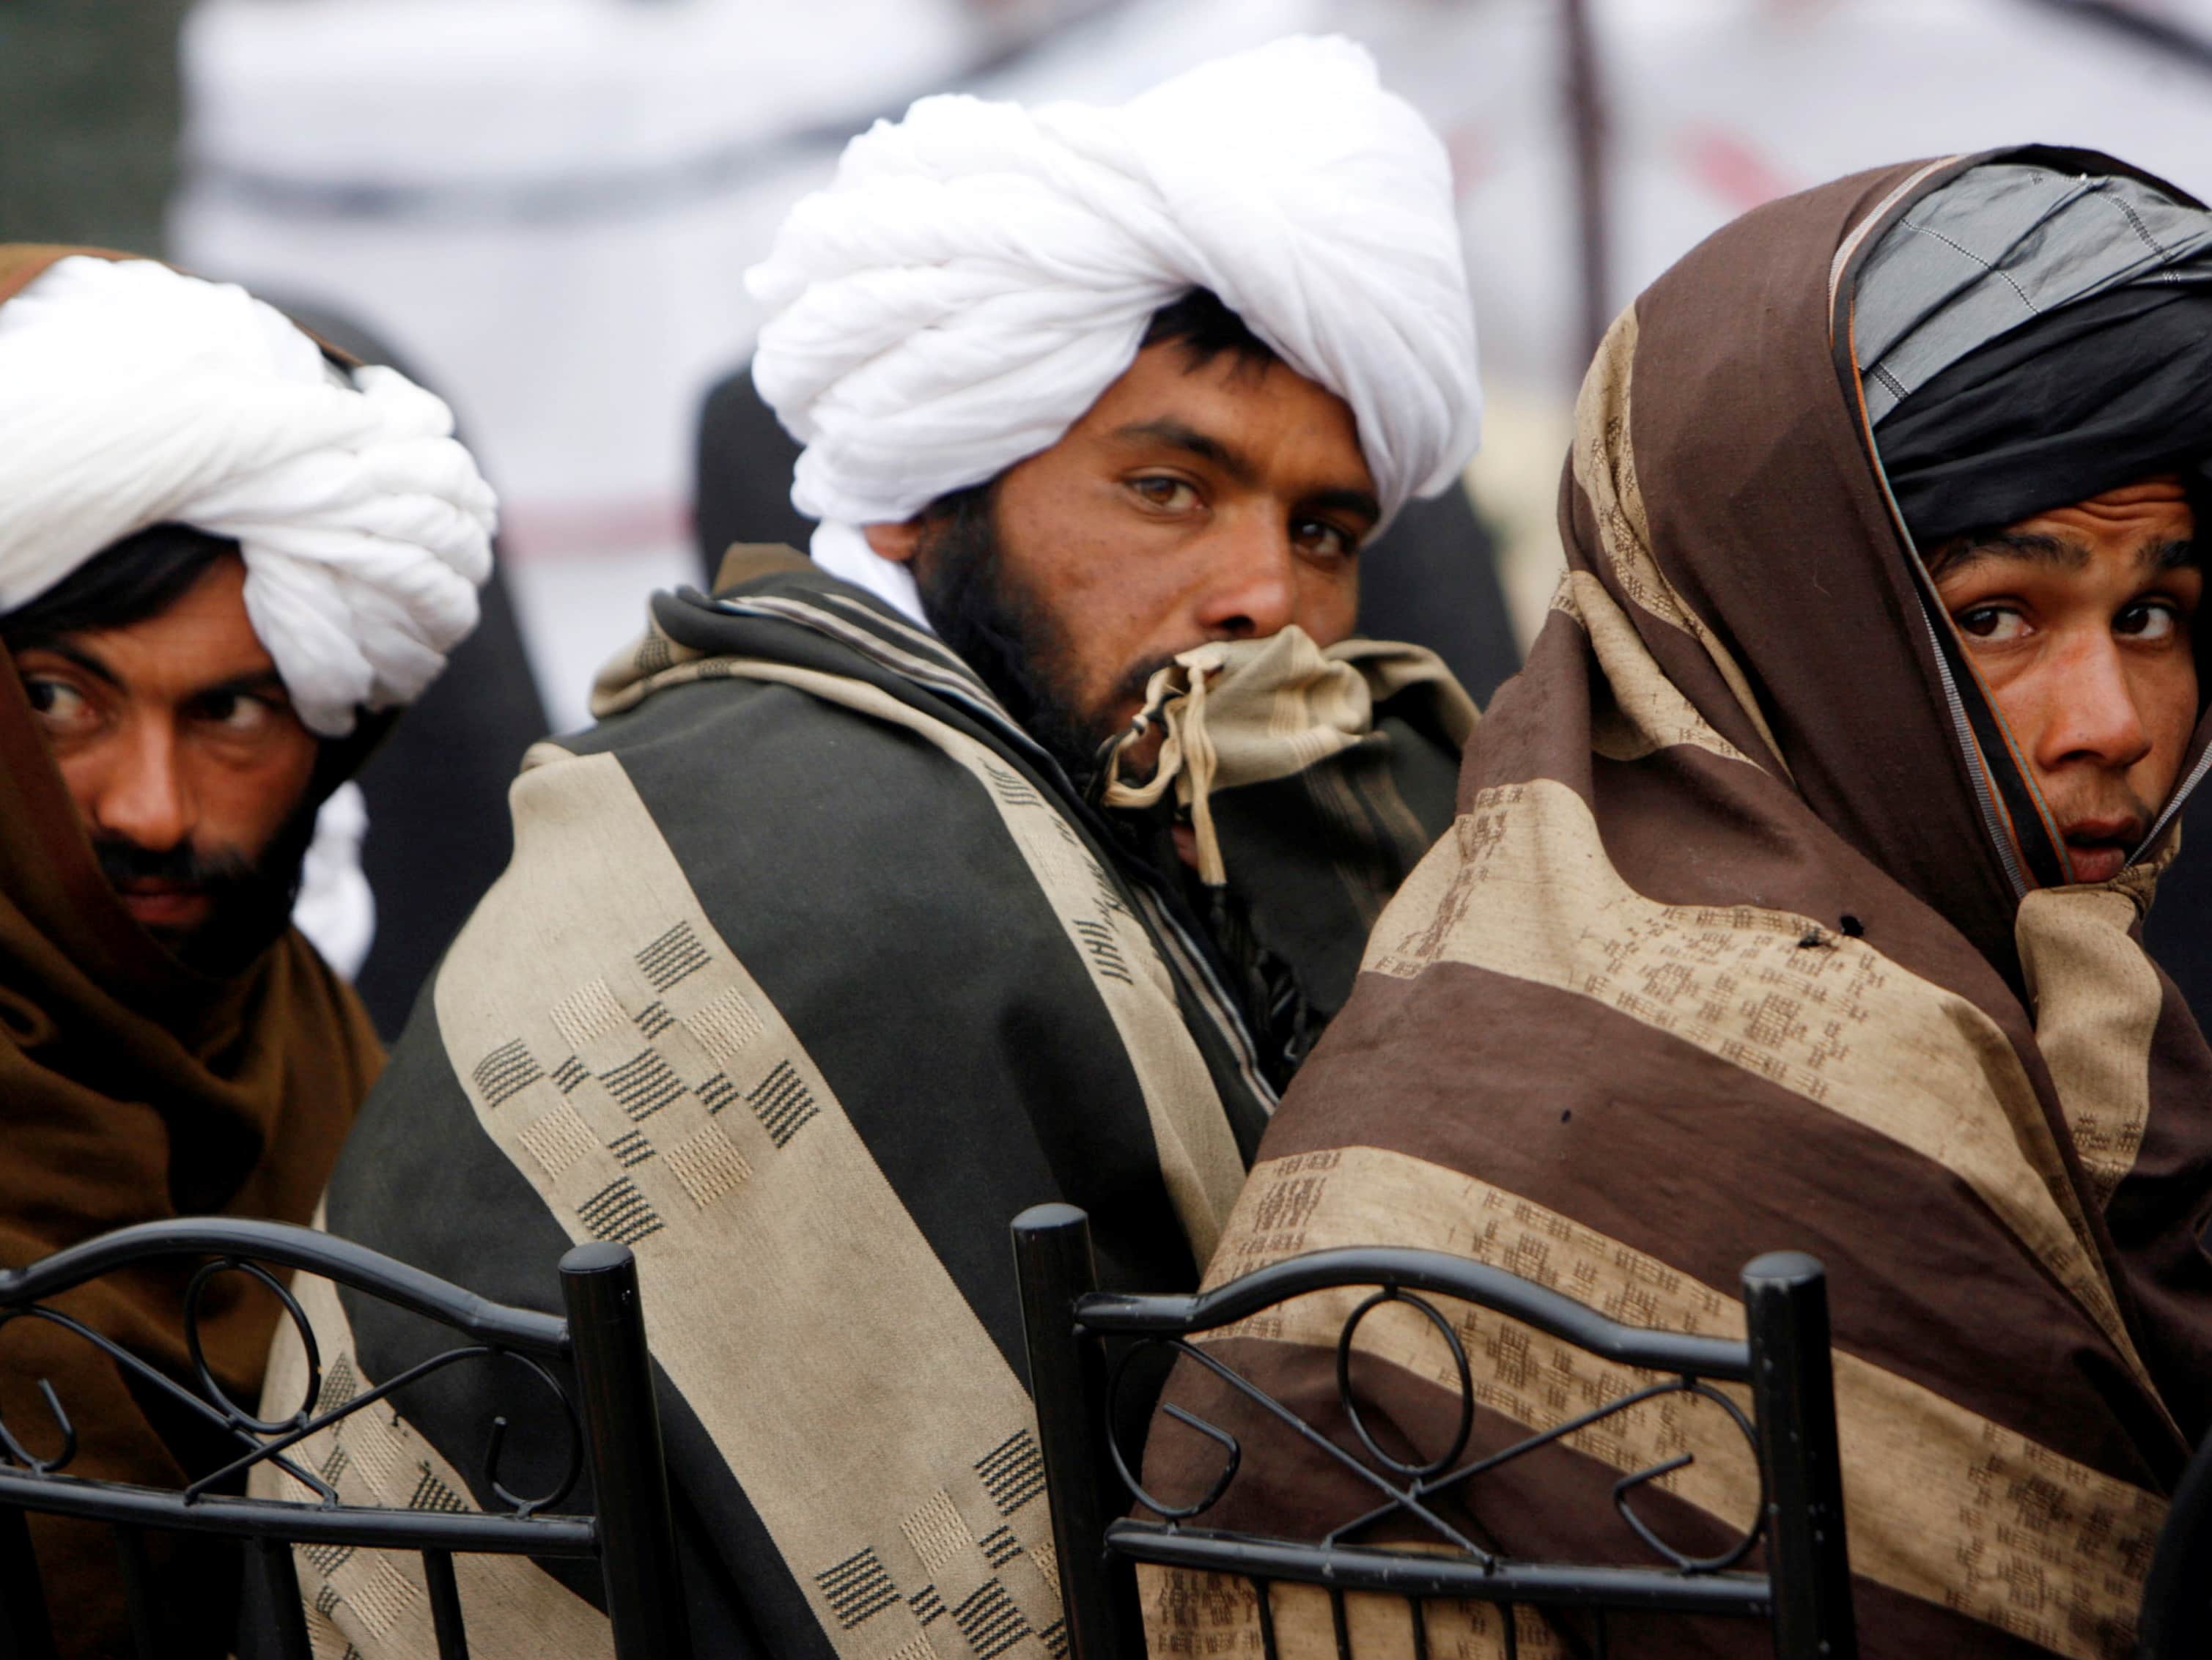 Taliban threats against Afghan journalists have been increasing in recent months; in this photo, Taliban look on after handing over their weapons as part of a reconciliation and reintegration programme in Herat province, February 2013, REUTERS/Mohmmad Shoib